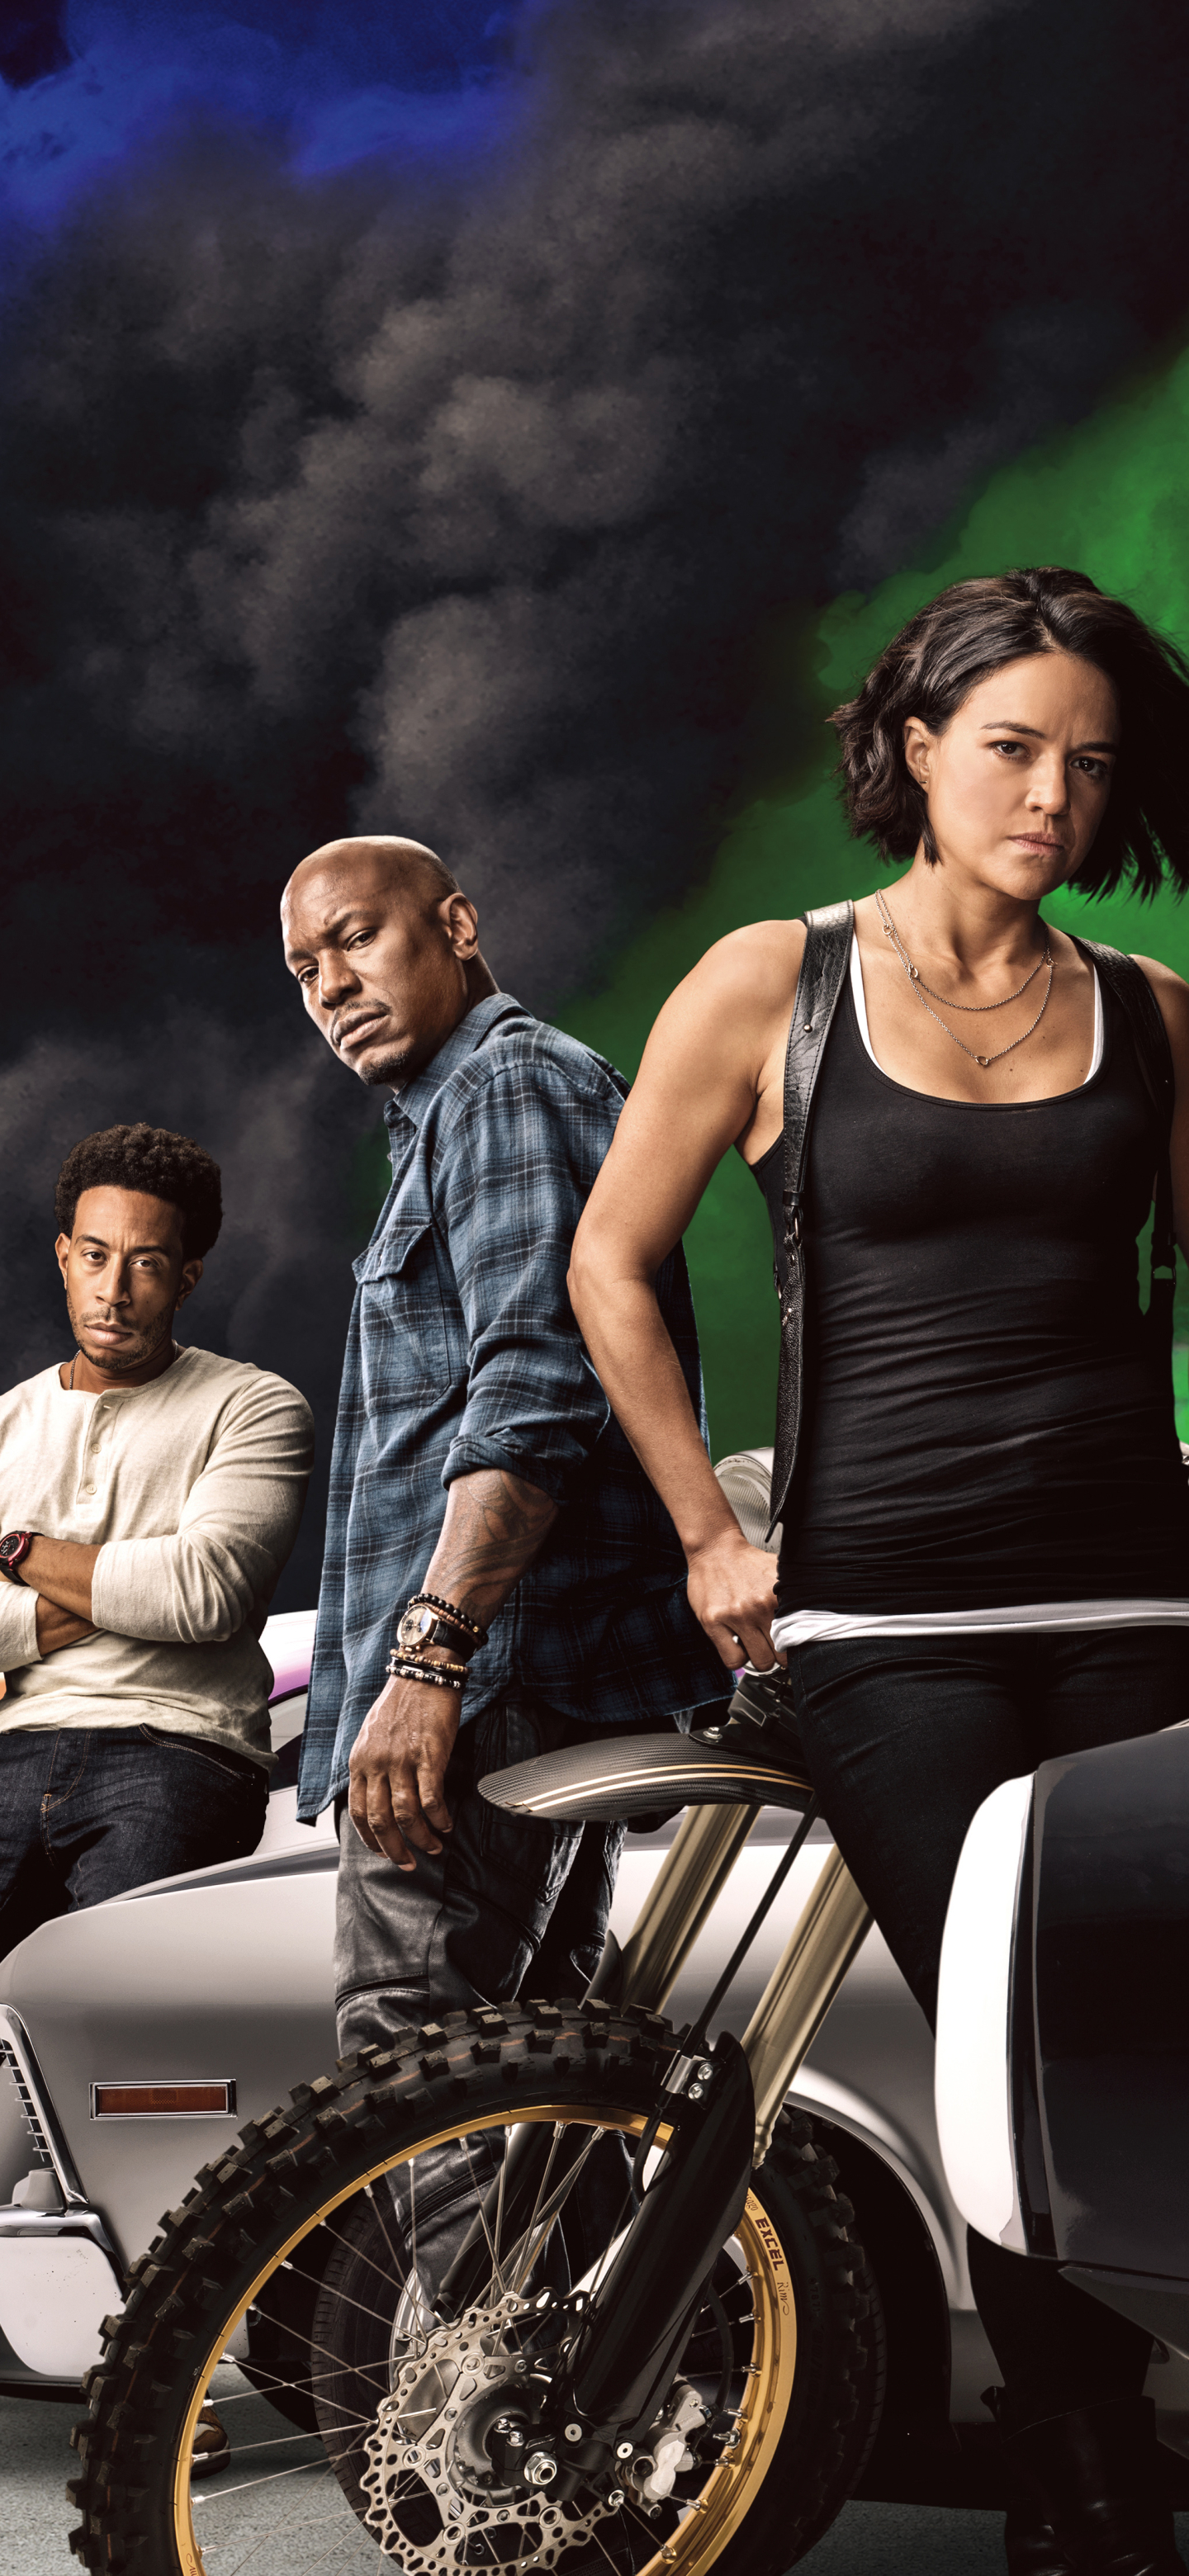 Download mobile wallpaper Fast & Furious, Movie, Tyrese Gibson, Ludacris, Roman Pearce, Tej (Fast & Furious), Michelle Rodriguez, Letty Ortiz, Fast & Furious 9 for free.